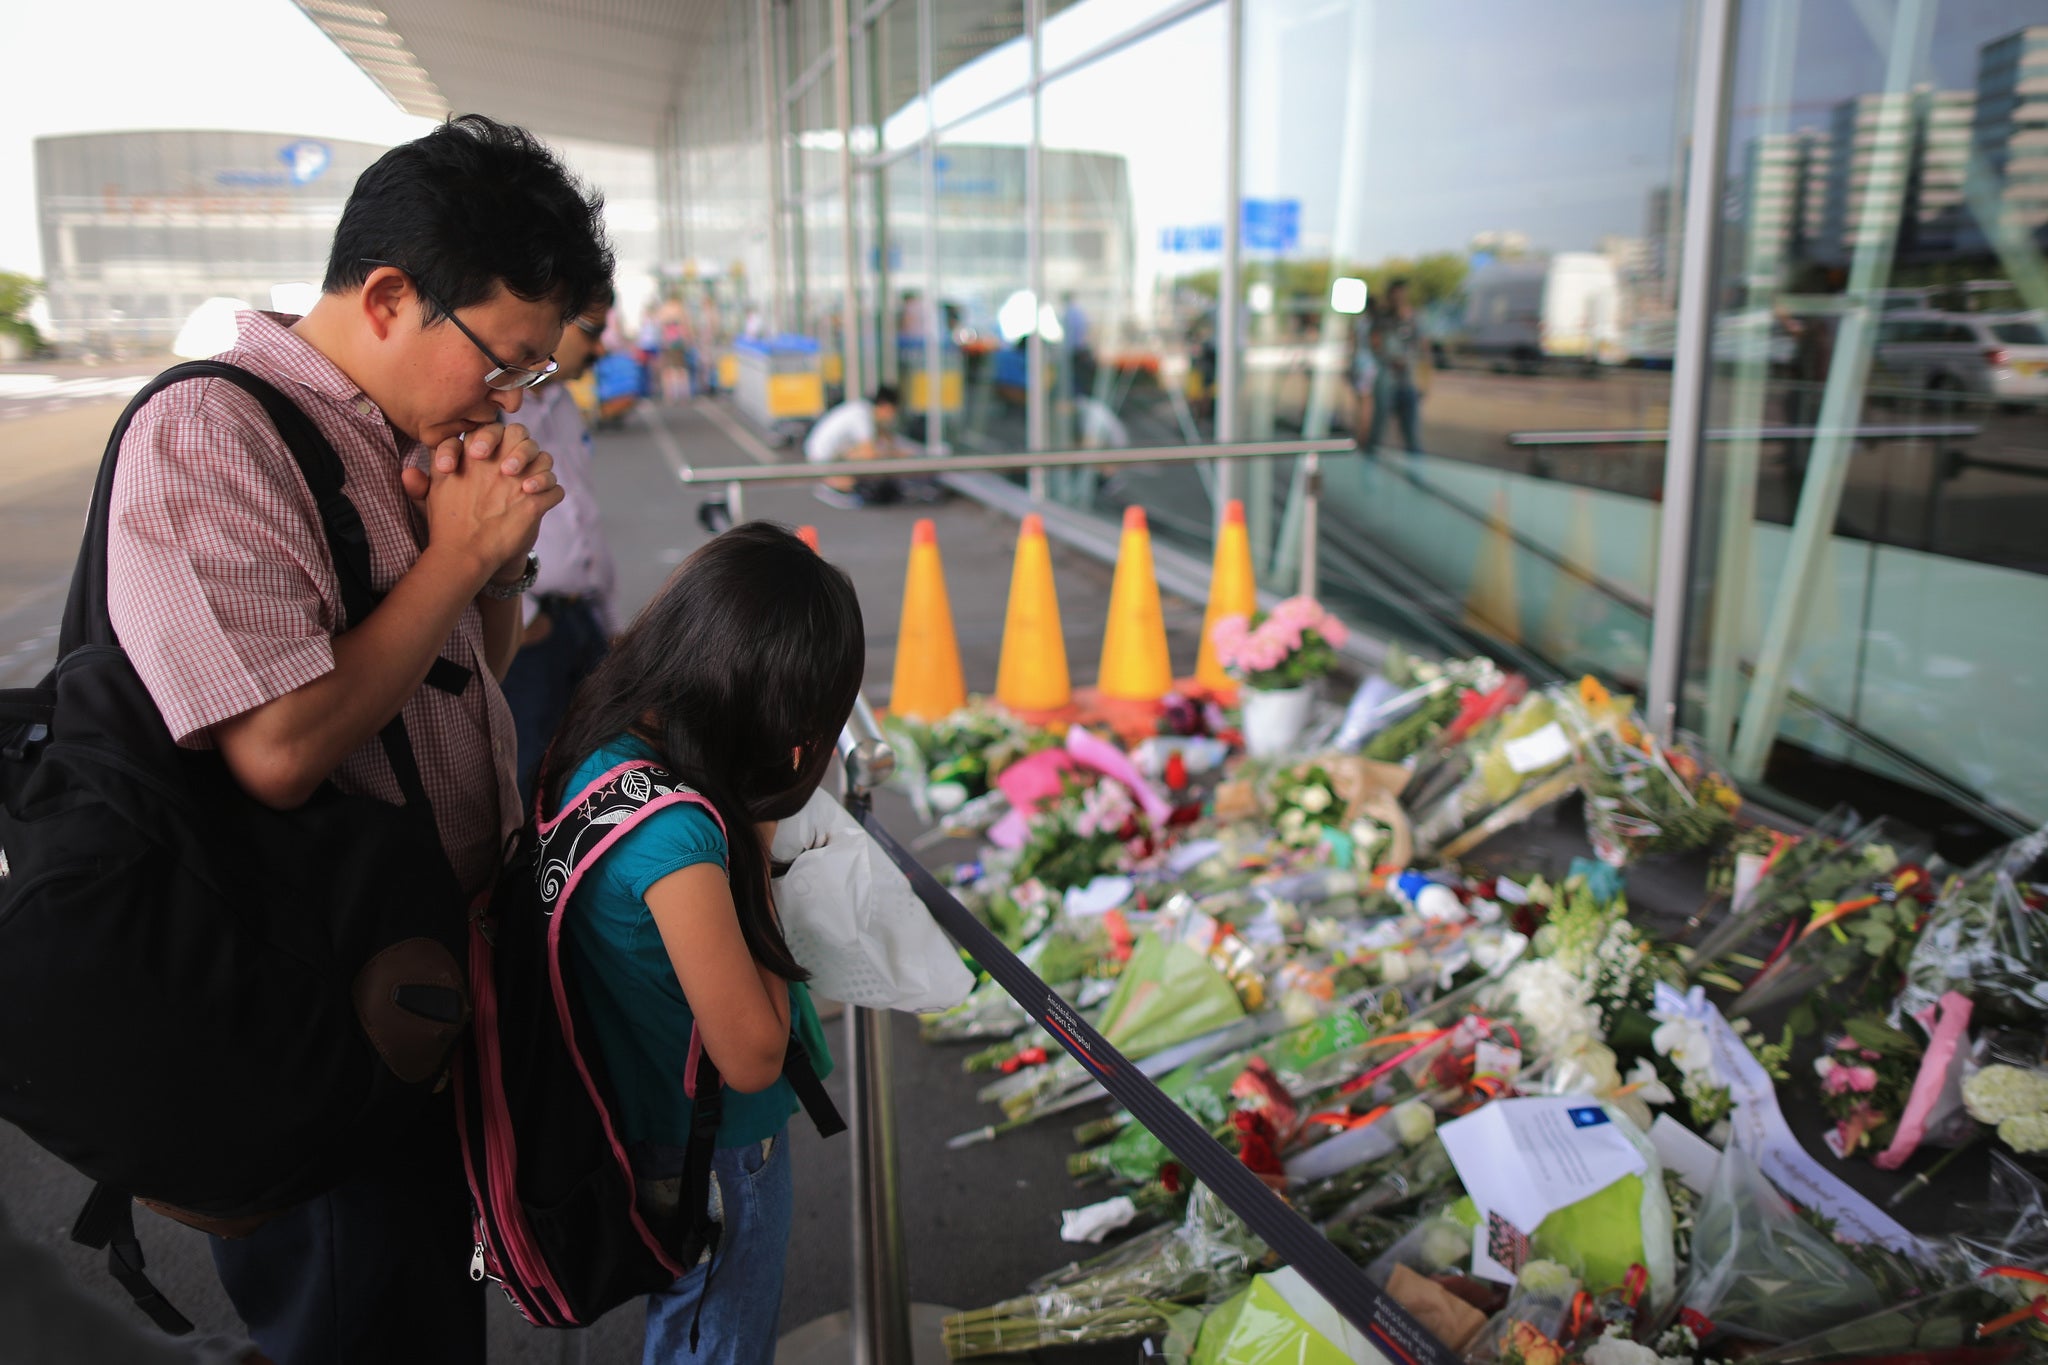 Mourners pray at the entrance to Schiphol Airport, Amsterdam